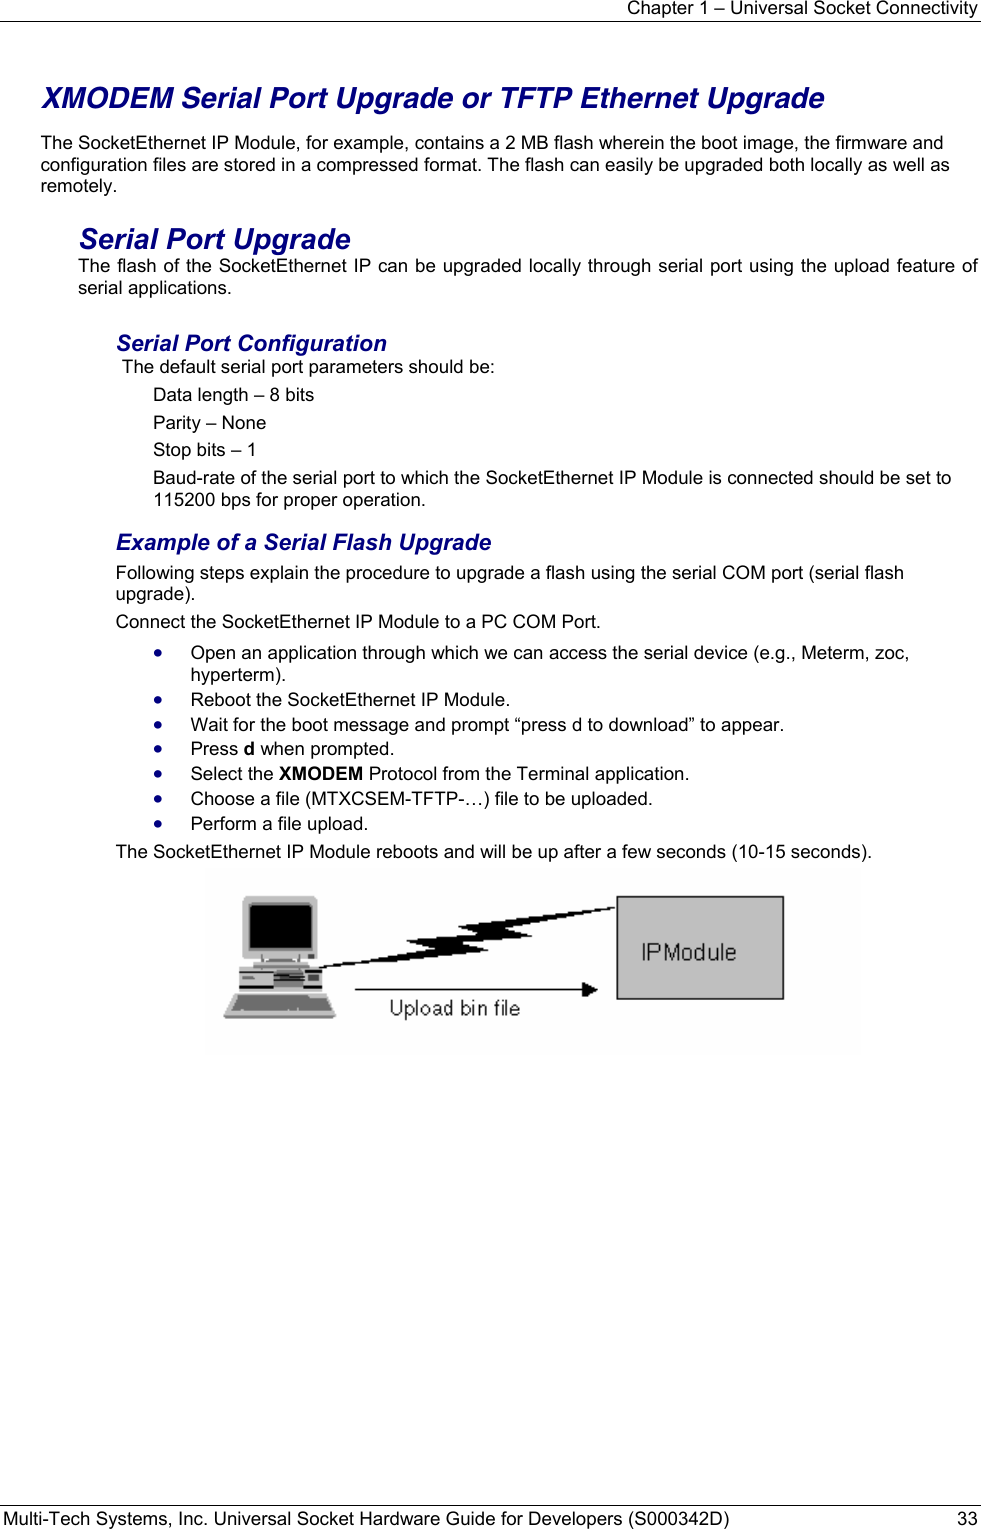 Chapter 1 – Universal Socket Connectivity Multi-Tech Systems, Inc. Universal Socket Hardware Guide for Developers (S000342D)  33   XMODEM Serial Port Upgrade or TFTP Ethernet Upgrade  The SocketEthernet IP Module, for example, contains a 2 MB flash wherein the boot image, the firmware and configuration files are stored in a compressed format. The flash can easily be upgraded both locally as well as remotely. Serial Port Upgrade The flash of the SocketEthernet IP can be upgraded locally through serial port using the upload feature of serial applications. Serial Port Configuration  The default serial port parameters should be: Data length – 8 bits Parity – None Stop bits – 1 Baud-rate of the serial port to which the SocketEthernet IP Module is connected should be set to 115200 bps for proper operation. Example of a Serial Flash Upgrade Following steps explain the procedure to upgrade a flash using the serial COM port (serial flash upgrade). Connect the SocketEthernet IP Module to a PC COM Port. • Open an application through which we can access the serial device (e.g., Meterm, zoc, hyperterm). • Reboot the SocketEthernet IP Module. • Wait for the boot message and prompt “press d to download” to appear. • Press d when prompted. • Select the XMODEM Protocol from the Terminal application.  • Choose a file (MTXCSEM-TFTP-…) file to be uploaded. • Perform a file upload. The SocketEthernet IP Module reboots and will be up after a few seconds (10-15 seconds).   